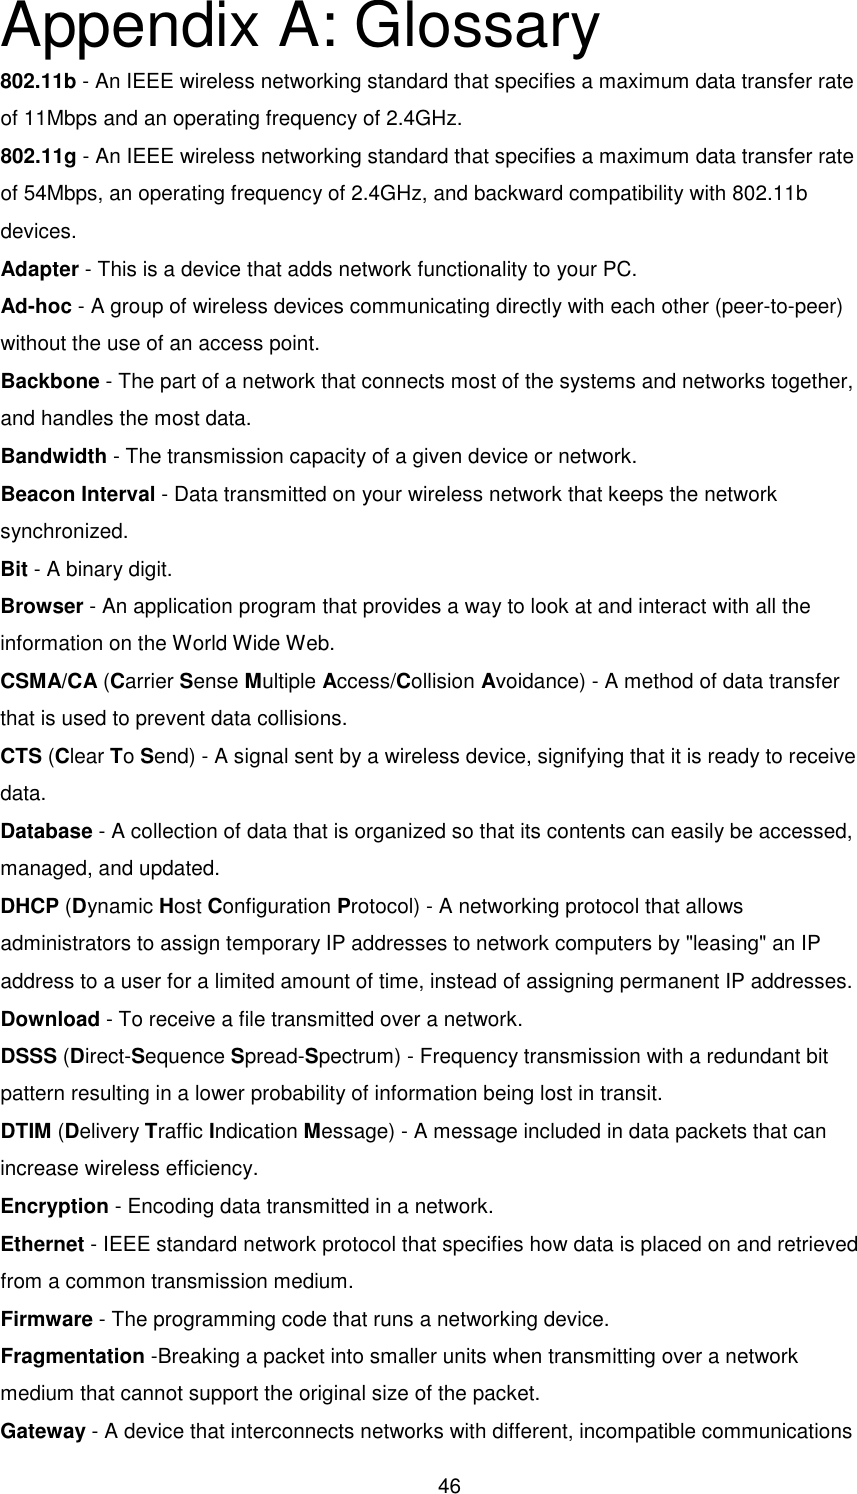  46 Appendix A: Glossary 802.11b - An IEEE wireless networking standard that specifies a maximum data transfer rate of 11Mbps and an operating frequency of 2.4GHz. 802.11g - An IEEE wireless networking standard that specifies a maximum data transfer rate of 54Mbps, an operating frequency of 2.4GHz, and backward compatibility with 802.11b devices. Adapter - This is a device that adds network functionality to your PC. Ad-hoc - A group of wireless devices communicating directly with each other (peer-to-peer) without the use of an access point. Backbone - The part of a network that connects most of the systems and networks together, and handles the most data. Bandwidth - The transmission capacity of a given device or network. Beacon Interval - Data transmitted on your wireless network that keeps the network synchronized. Bit - A binary digit. Browser - An application program that provides a way to look at and interact with all the information on the World Wide Web. CSMA/CA (Carrier Sense Multiple Access/Collision Avoidance) - A method of data transfer that is used to prevent data collisions. CTS (Clear To Send) - A signal sent by a wireless device, signifying that it is ready to receive data. Database - A collection of data that is organized so that its contents can easily be accessed, managed, and updated. DHCP (Dynamic Host Configuration Protocol) - A networking protocol that allows administrators to assign temporary IP addresses to network computers by &quot;leasing&quot; an IP address to a user for a limited amount of time, instead of assigning permanent IP addresses. Download - To receive a file transmitted over a network. DSSS (Direct-Sequence Spread-Spectrum) - Frequency transmission with a redundant bit pattern resulting in a lower probability of information being lost in transit. DTIM (Delivery Traffic Indication Message) - A message included in data packets that can increase wireless efficiency. Encryption - Encoding data transmitted in a network. Ethernet - IEEE standard network protocol that specifies how data is placed on and retrieved from a common transmission medium. Firmware - The programming code that runs a networking device. Fragmentation -Breaking a packet into smaller units when transmitting over a network medium that cannot support the original size of the packet. Gateway - A device that interconnects networks with different, incompatible communications 